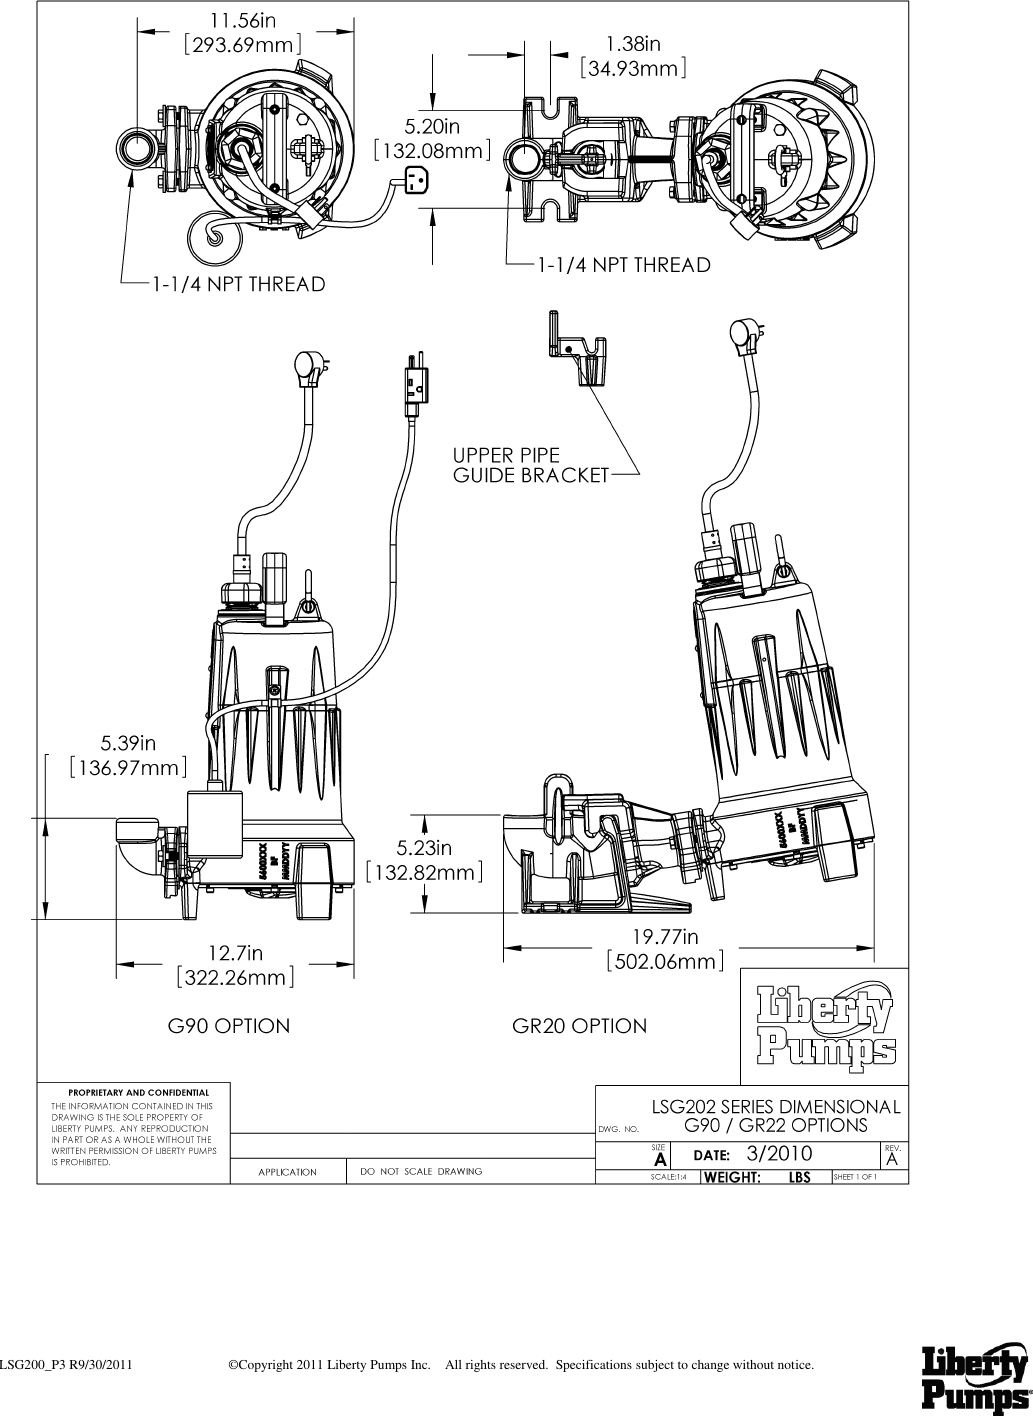 Page 3 of 7 - 481 3 Liberty Lsg202A Curves 1 User Manual